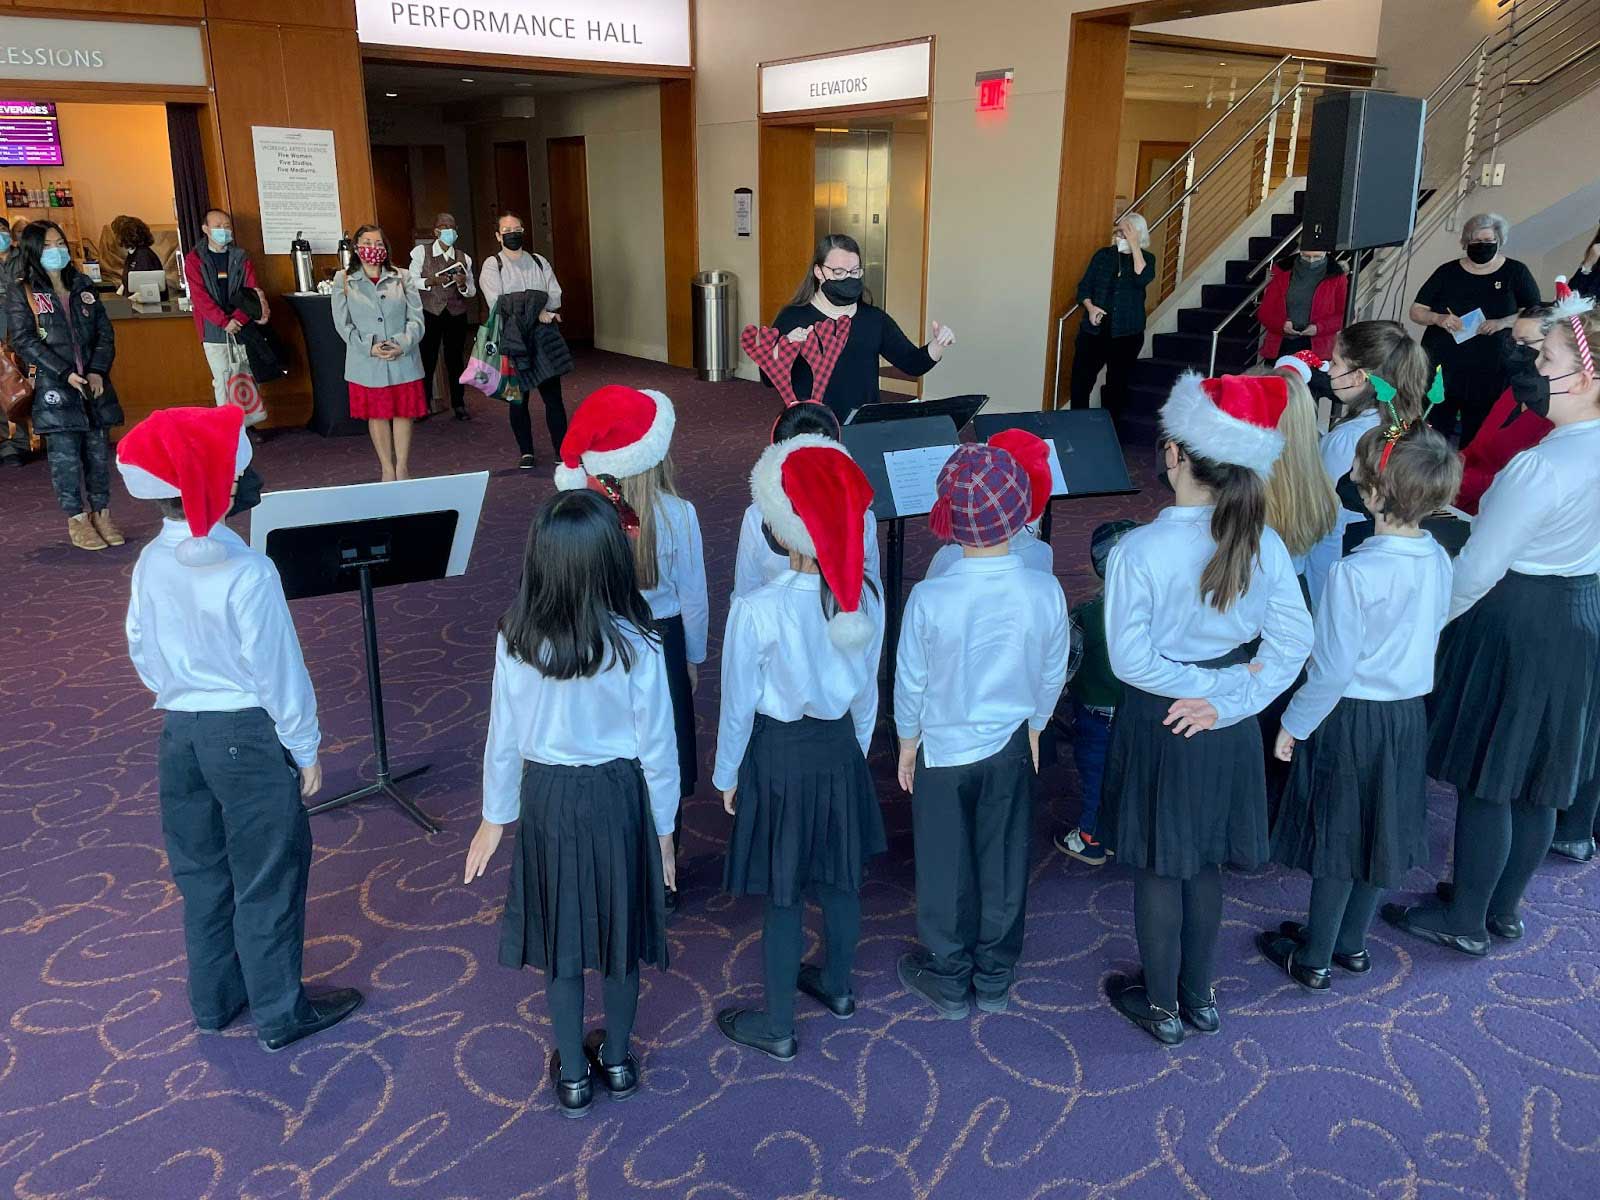 Children's chorus sings at Sandler Center for the Performing Arts